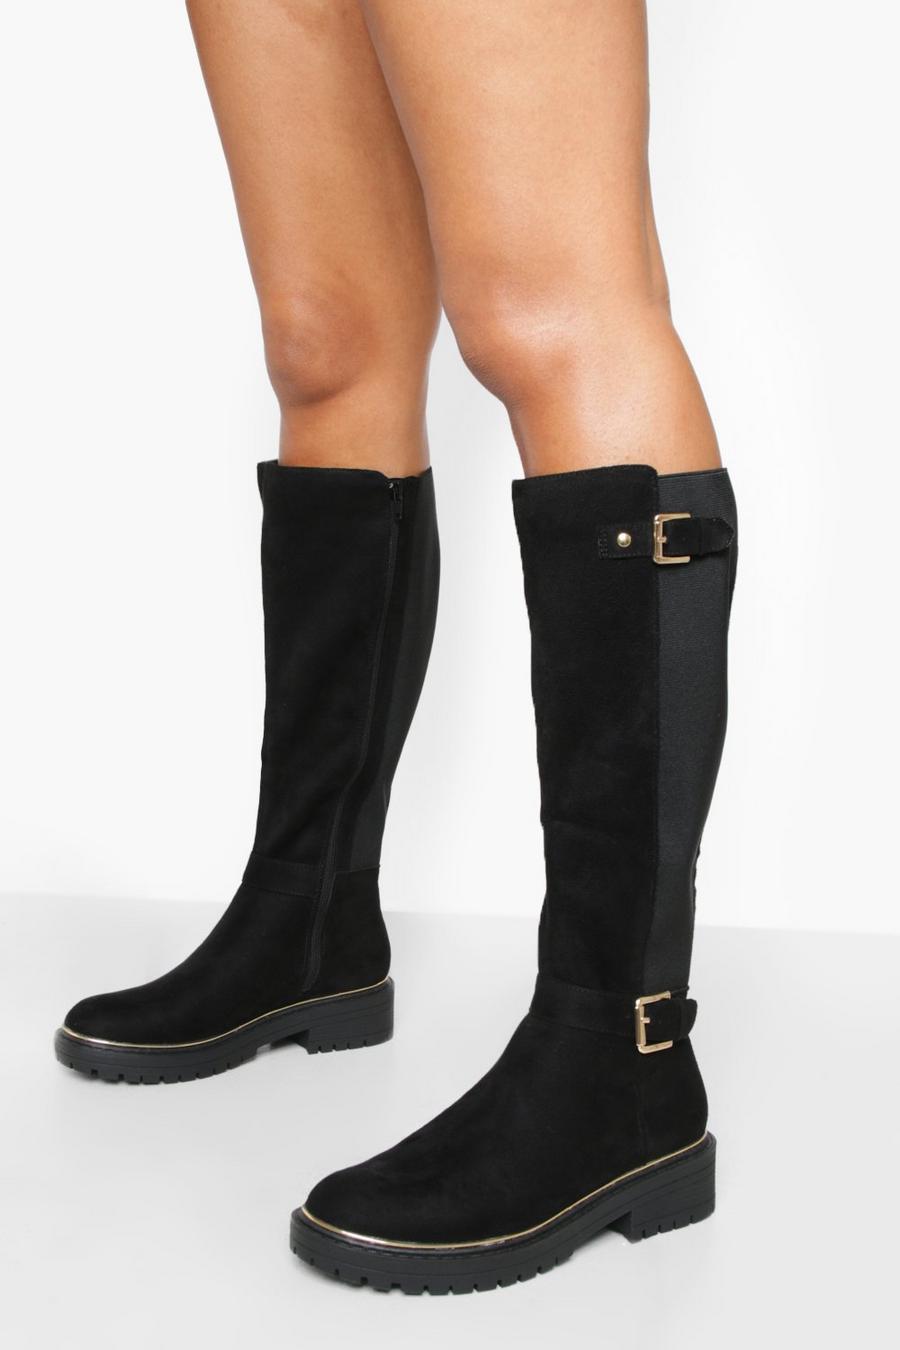 Black Buckle Knee High Riding Boots image number 1